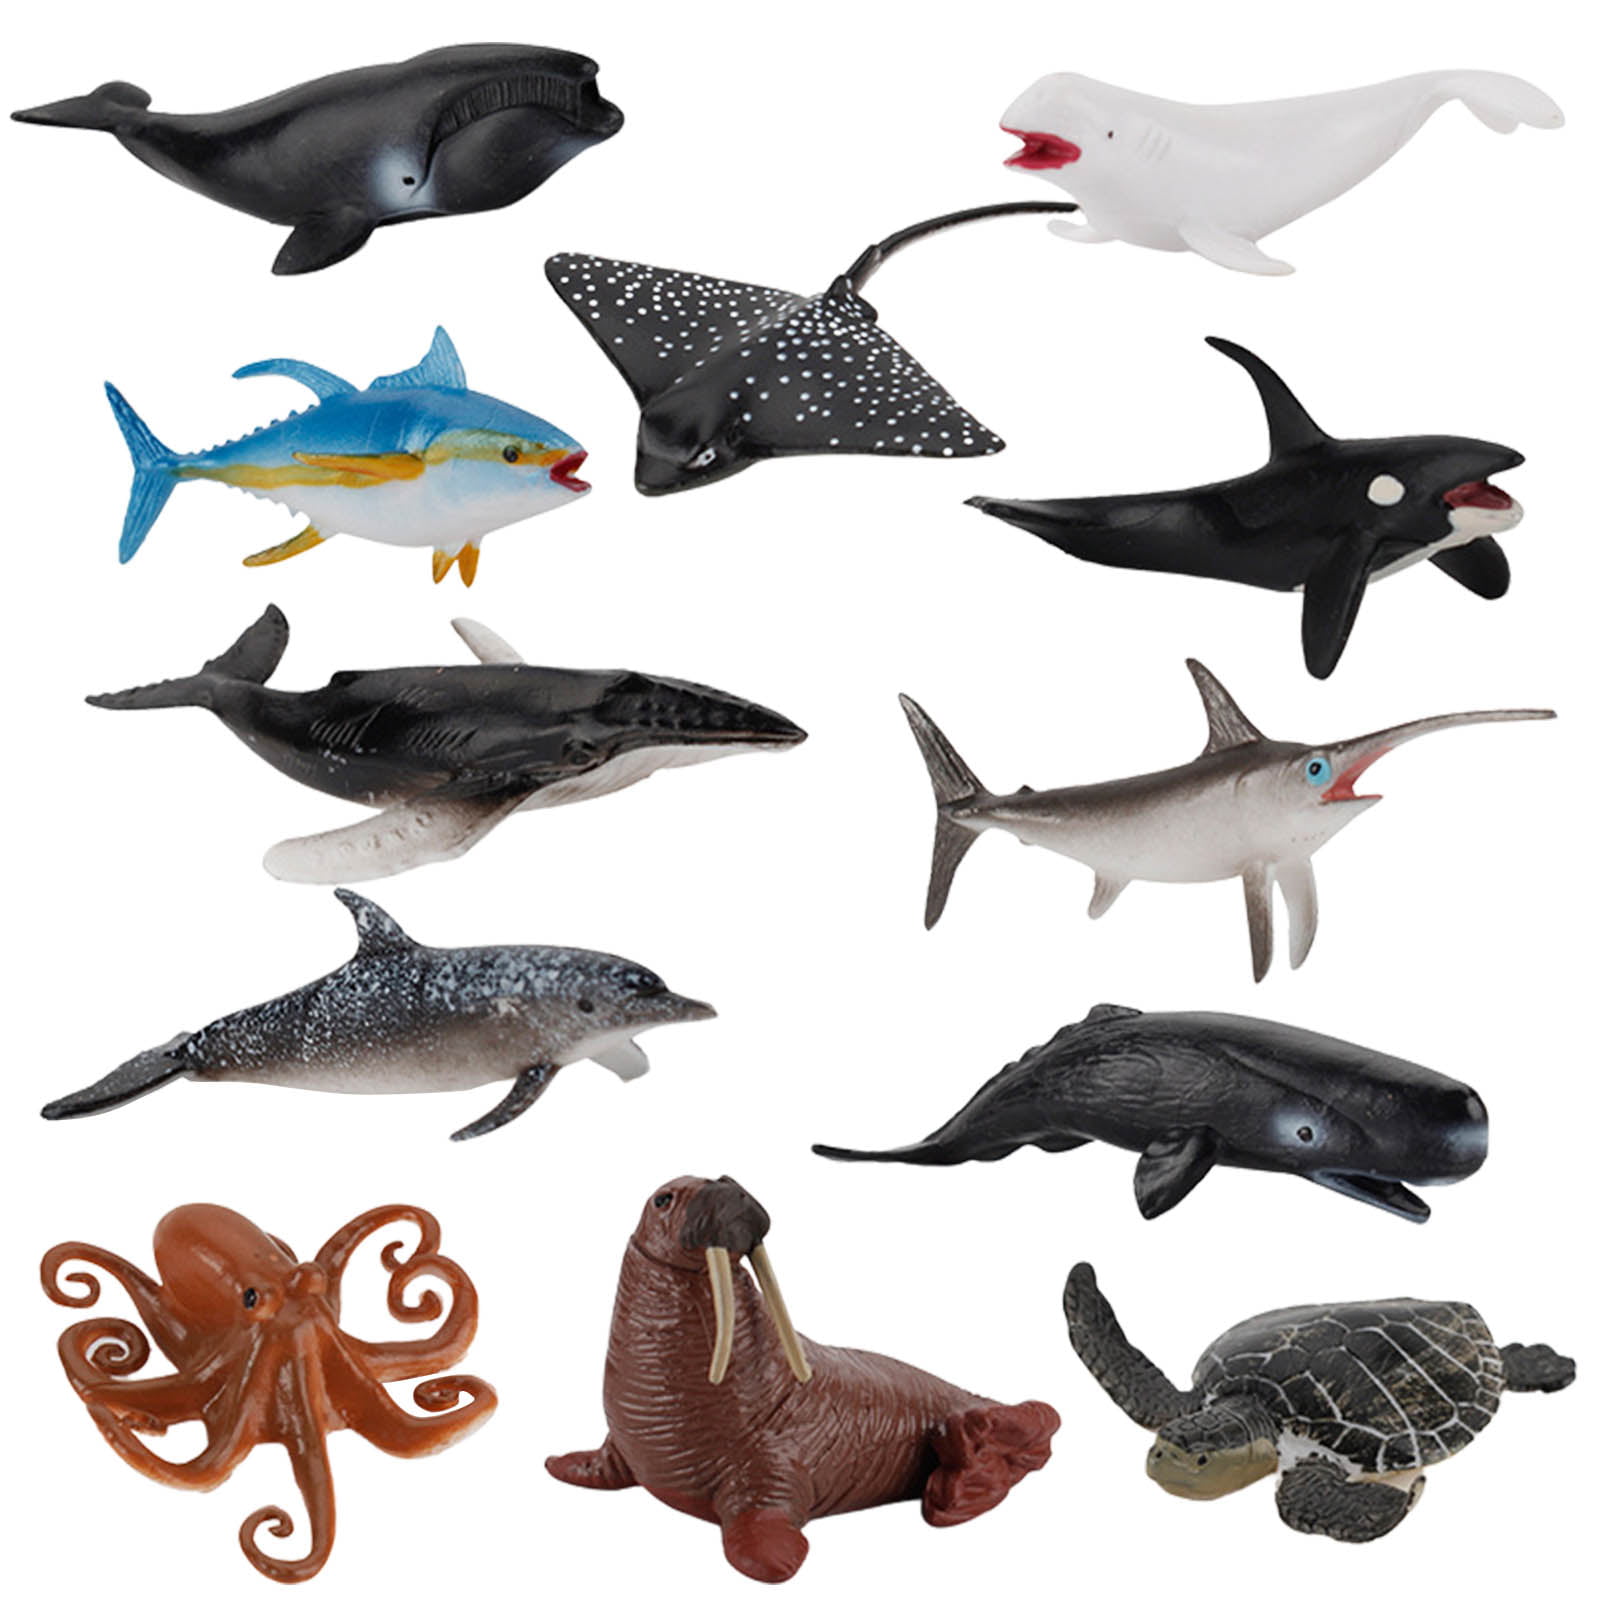 ibaste 12PCS Sea Creature Toys - Tiny Ocean Animal Figurines Toy | Sea  Animals Fish Whale Penguin Toy Sets for Toddlers Kids Toy or Home  Decorations 